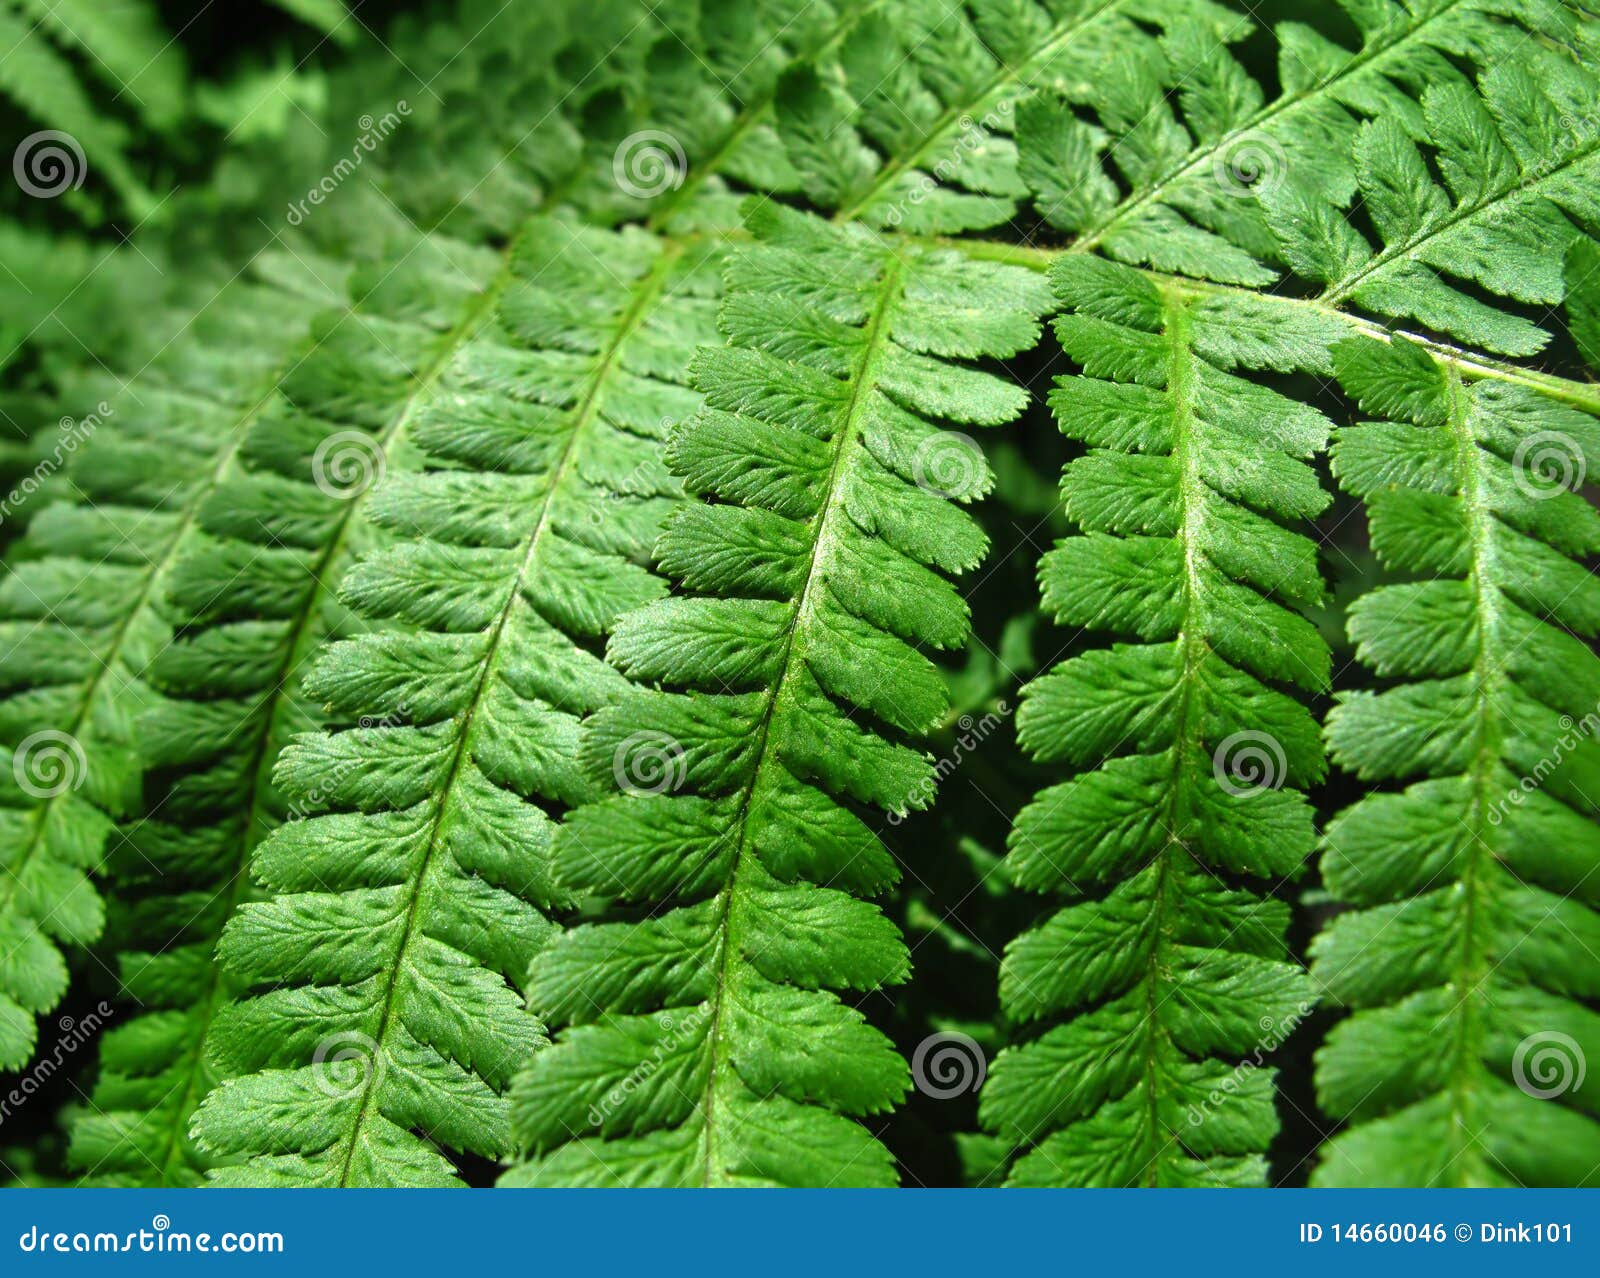 Green Fern Leafs Background Stock Photo - Image of nature, leaf: 14660046